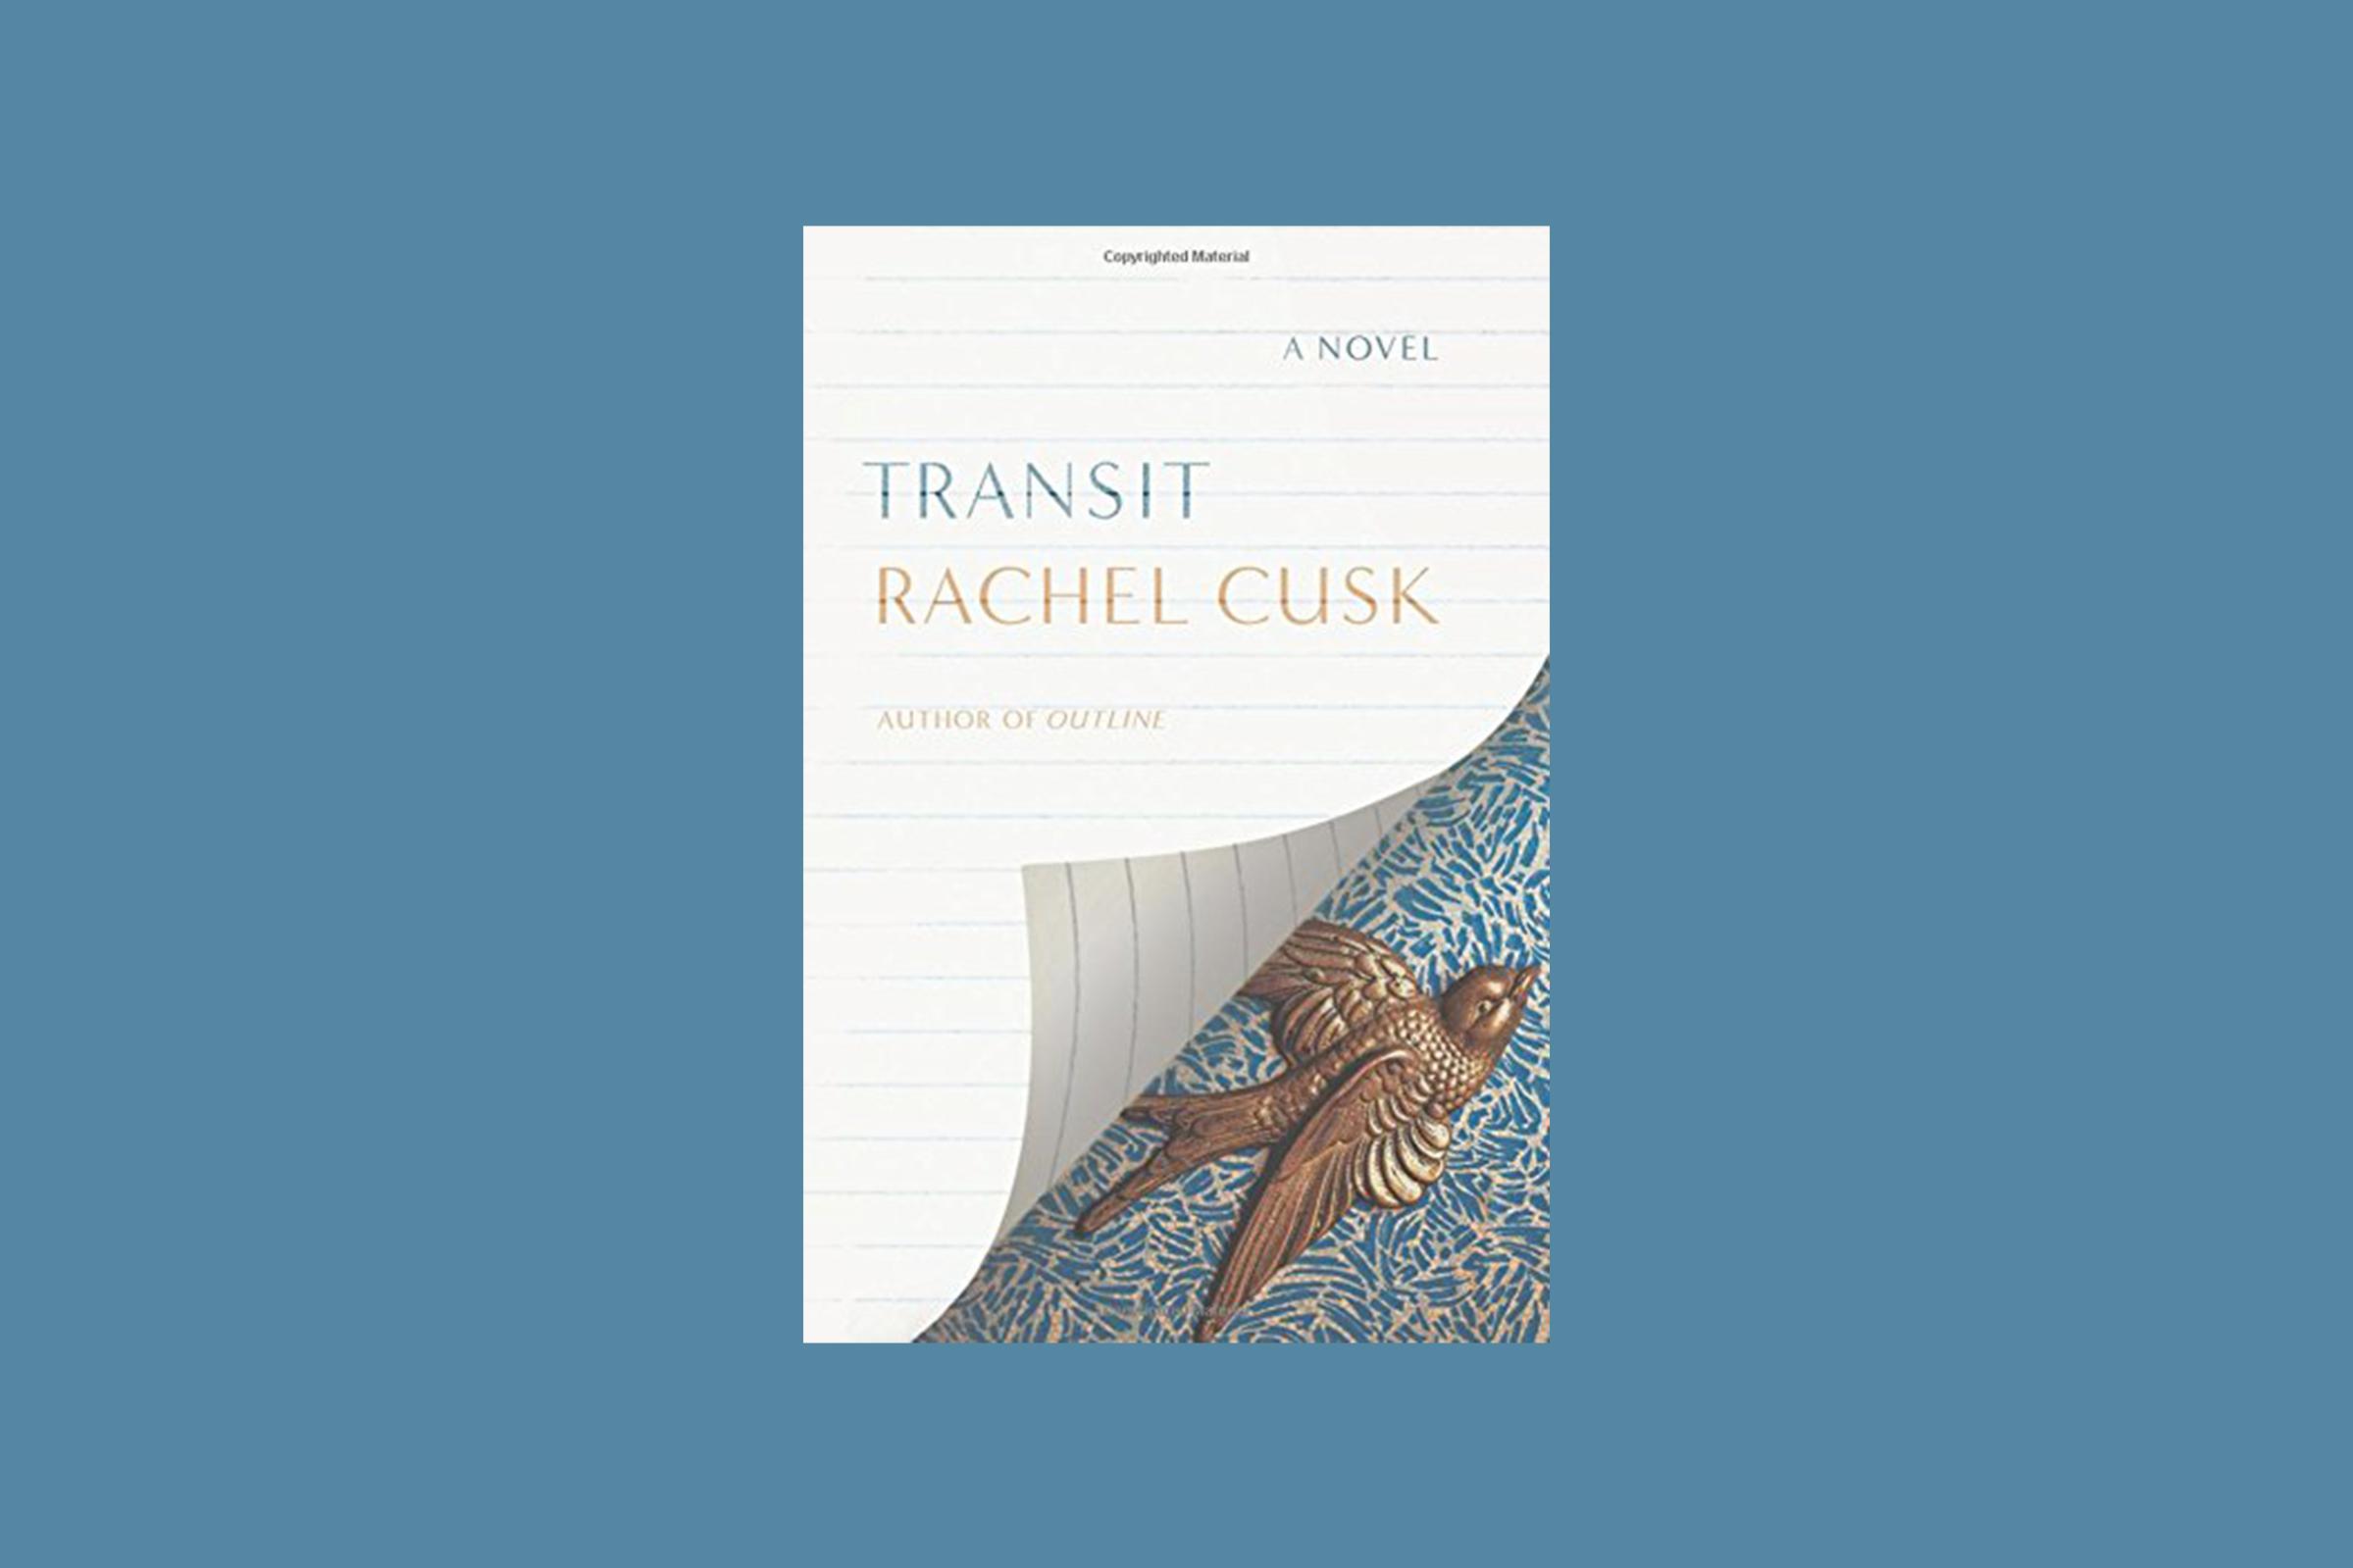 Transit is one of the top 10 novels of 2017